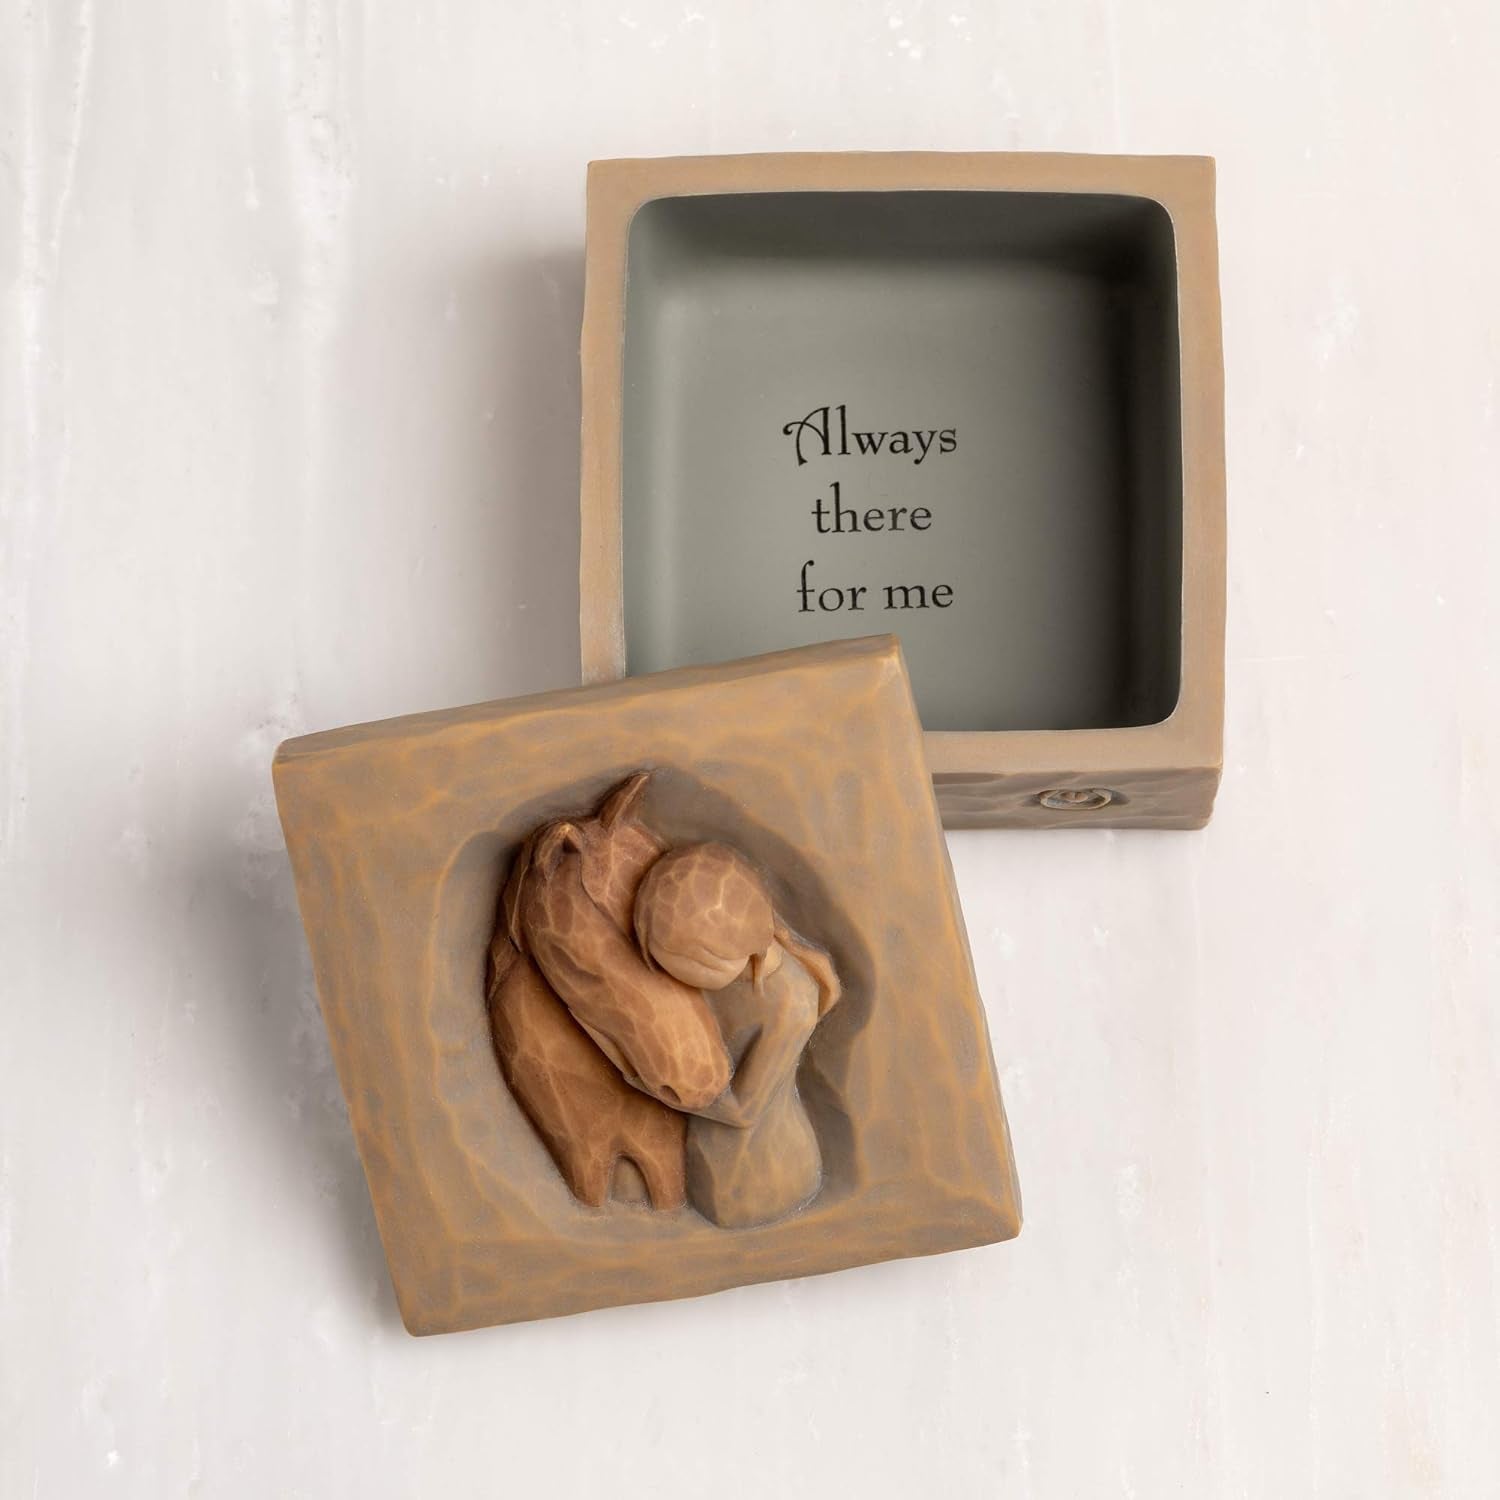 Whispers of Resilience: Hand-Painted Quiet Strength Keepsake Box. A Sculpted Tribute to Cherished Memories